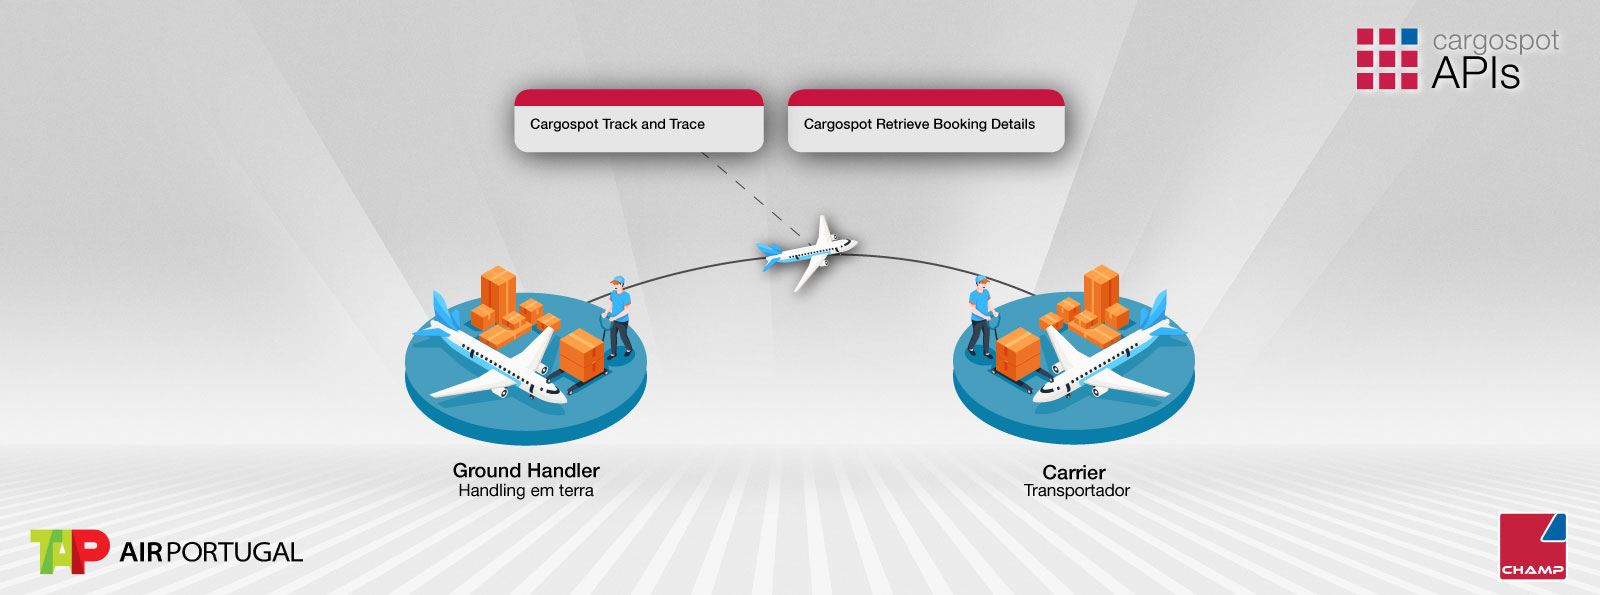 The background and logos remain as in the first image in the gallery. In the center, in highlight, it presents two rectangles with the CargoSpot Track and Trace and Retrieve Booking Details APIs, and three illustrations. In the first and third illustrations (both with the caption “Ground Handler") you can see a man carrying boxes next to an airplane. In the middle, the second illustration, with the caption “Carrier”, shows an airplane bridging the first and third illustrations.